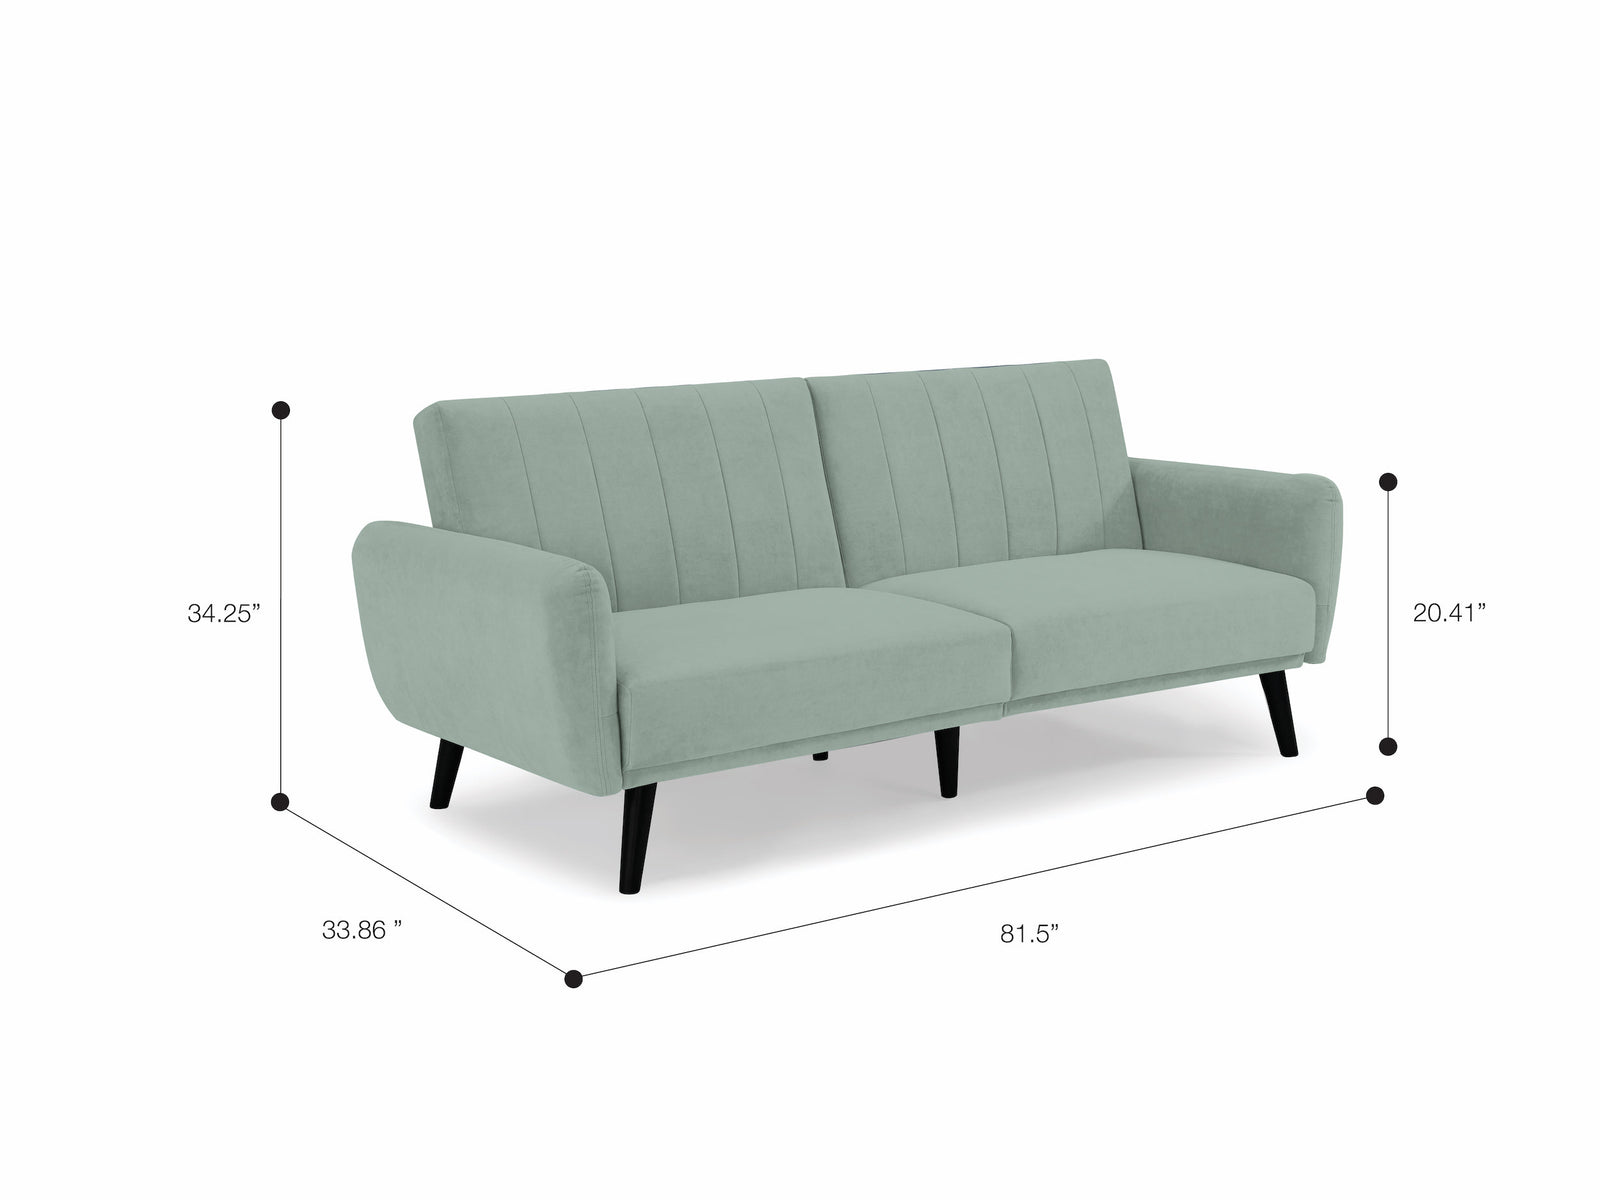 Home All products Vento Sofa Convertible (Cosmic Teal)